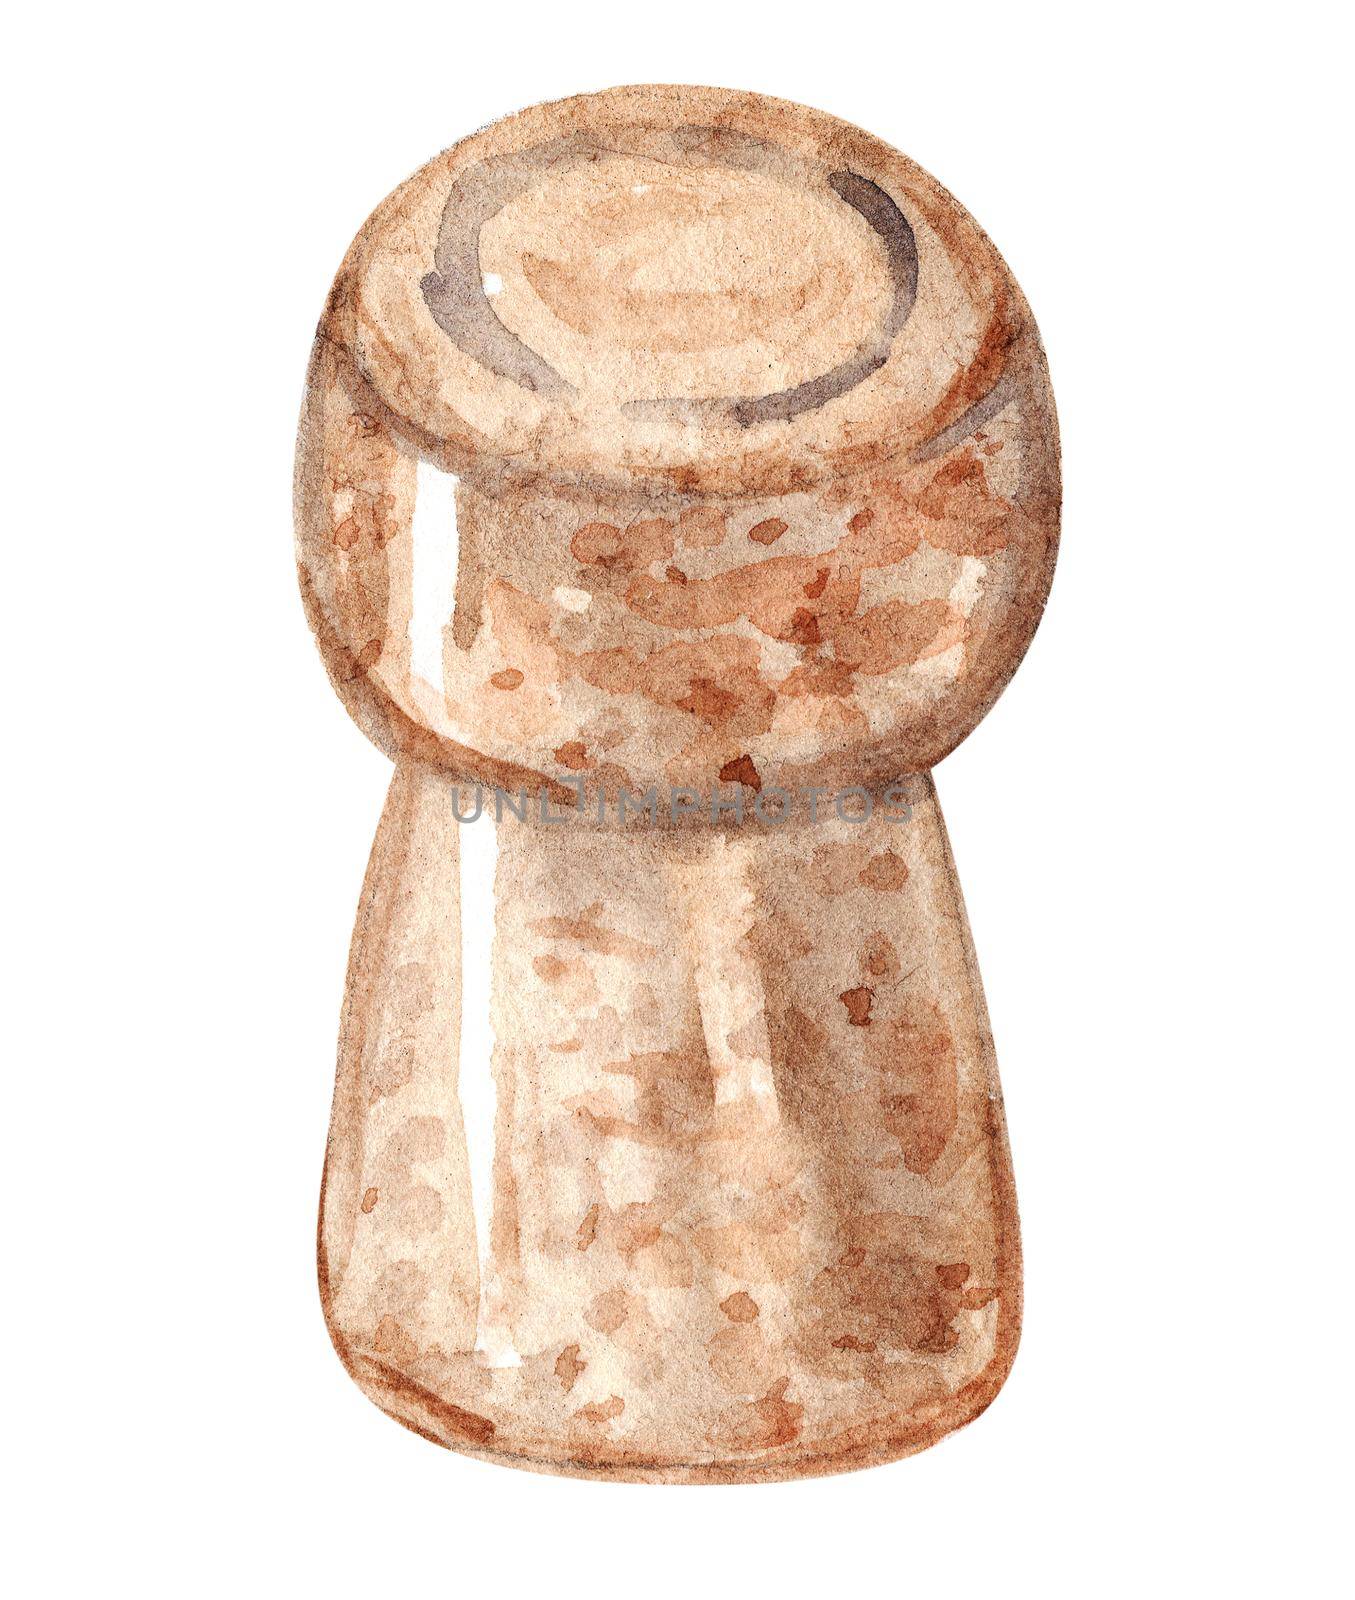 Watercolor wine cork isolated on white background